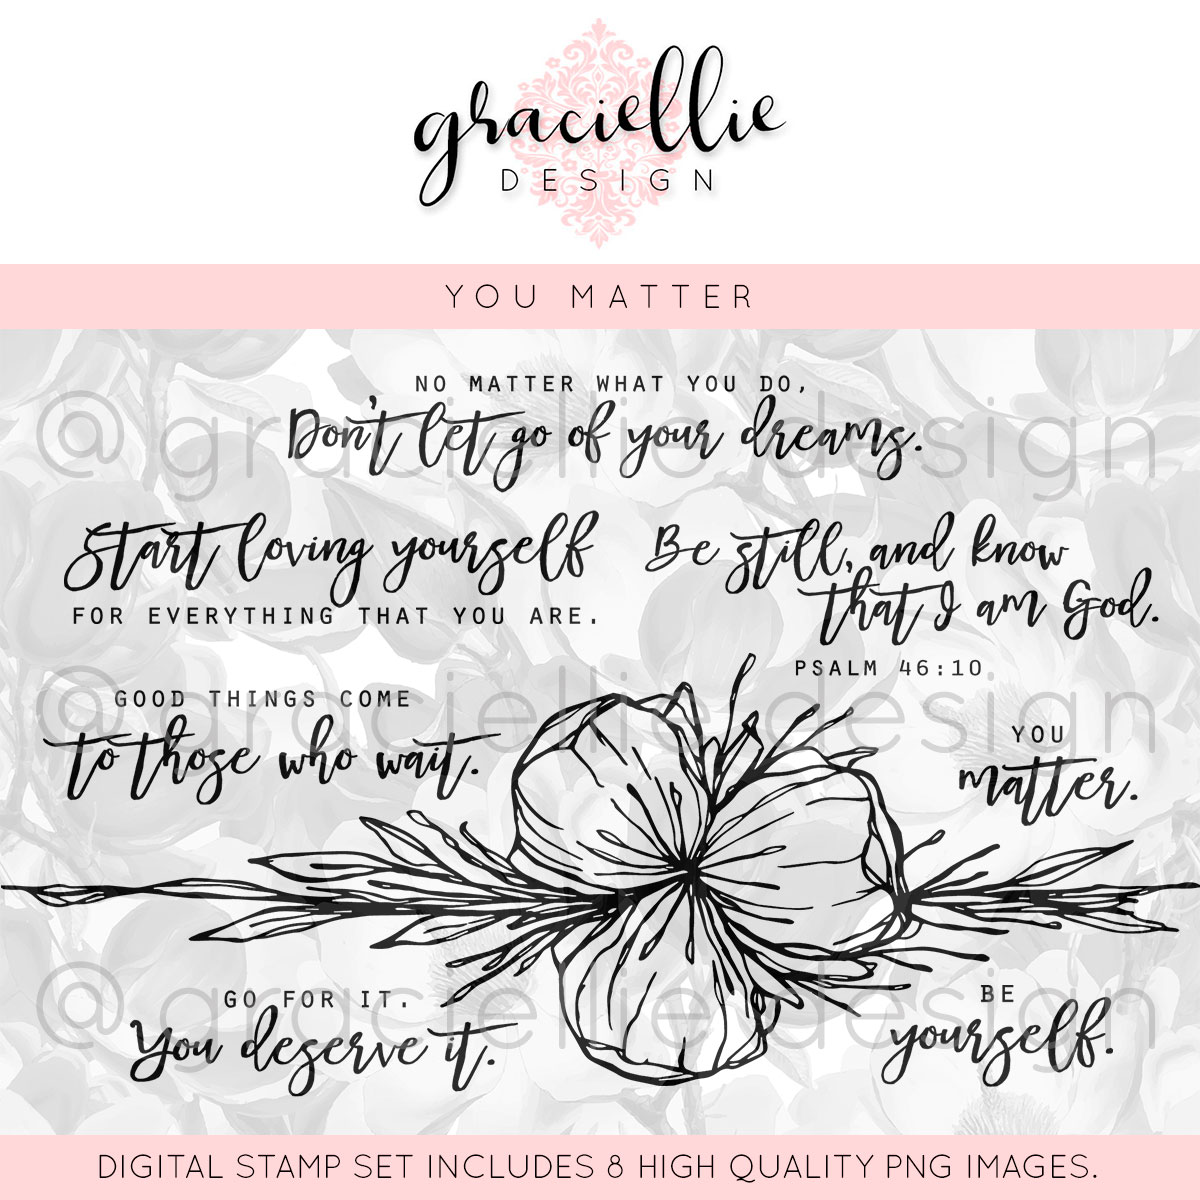 YouMatter_GraciellieDesign_CO_